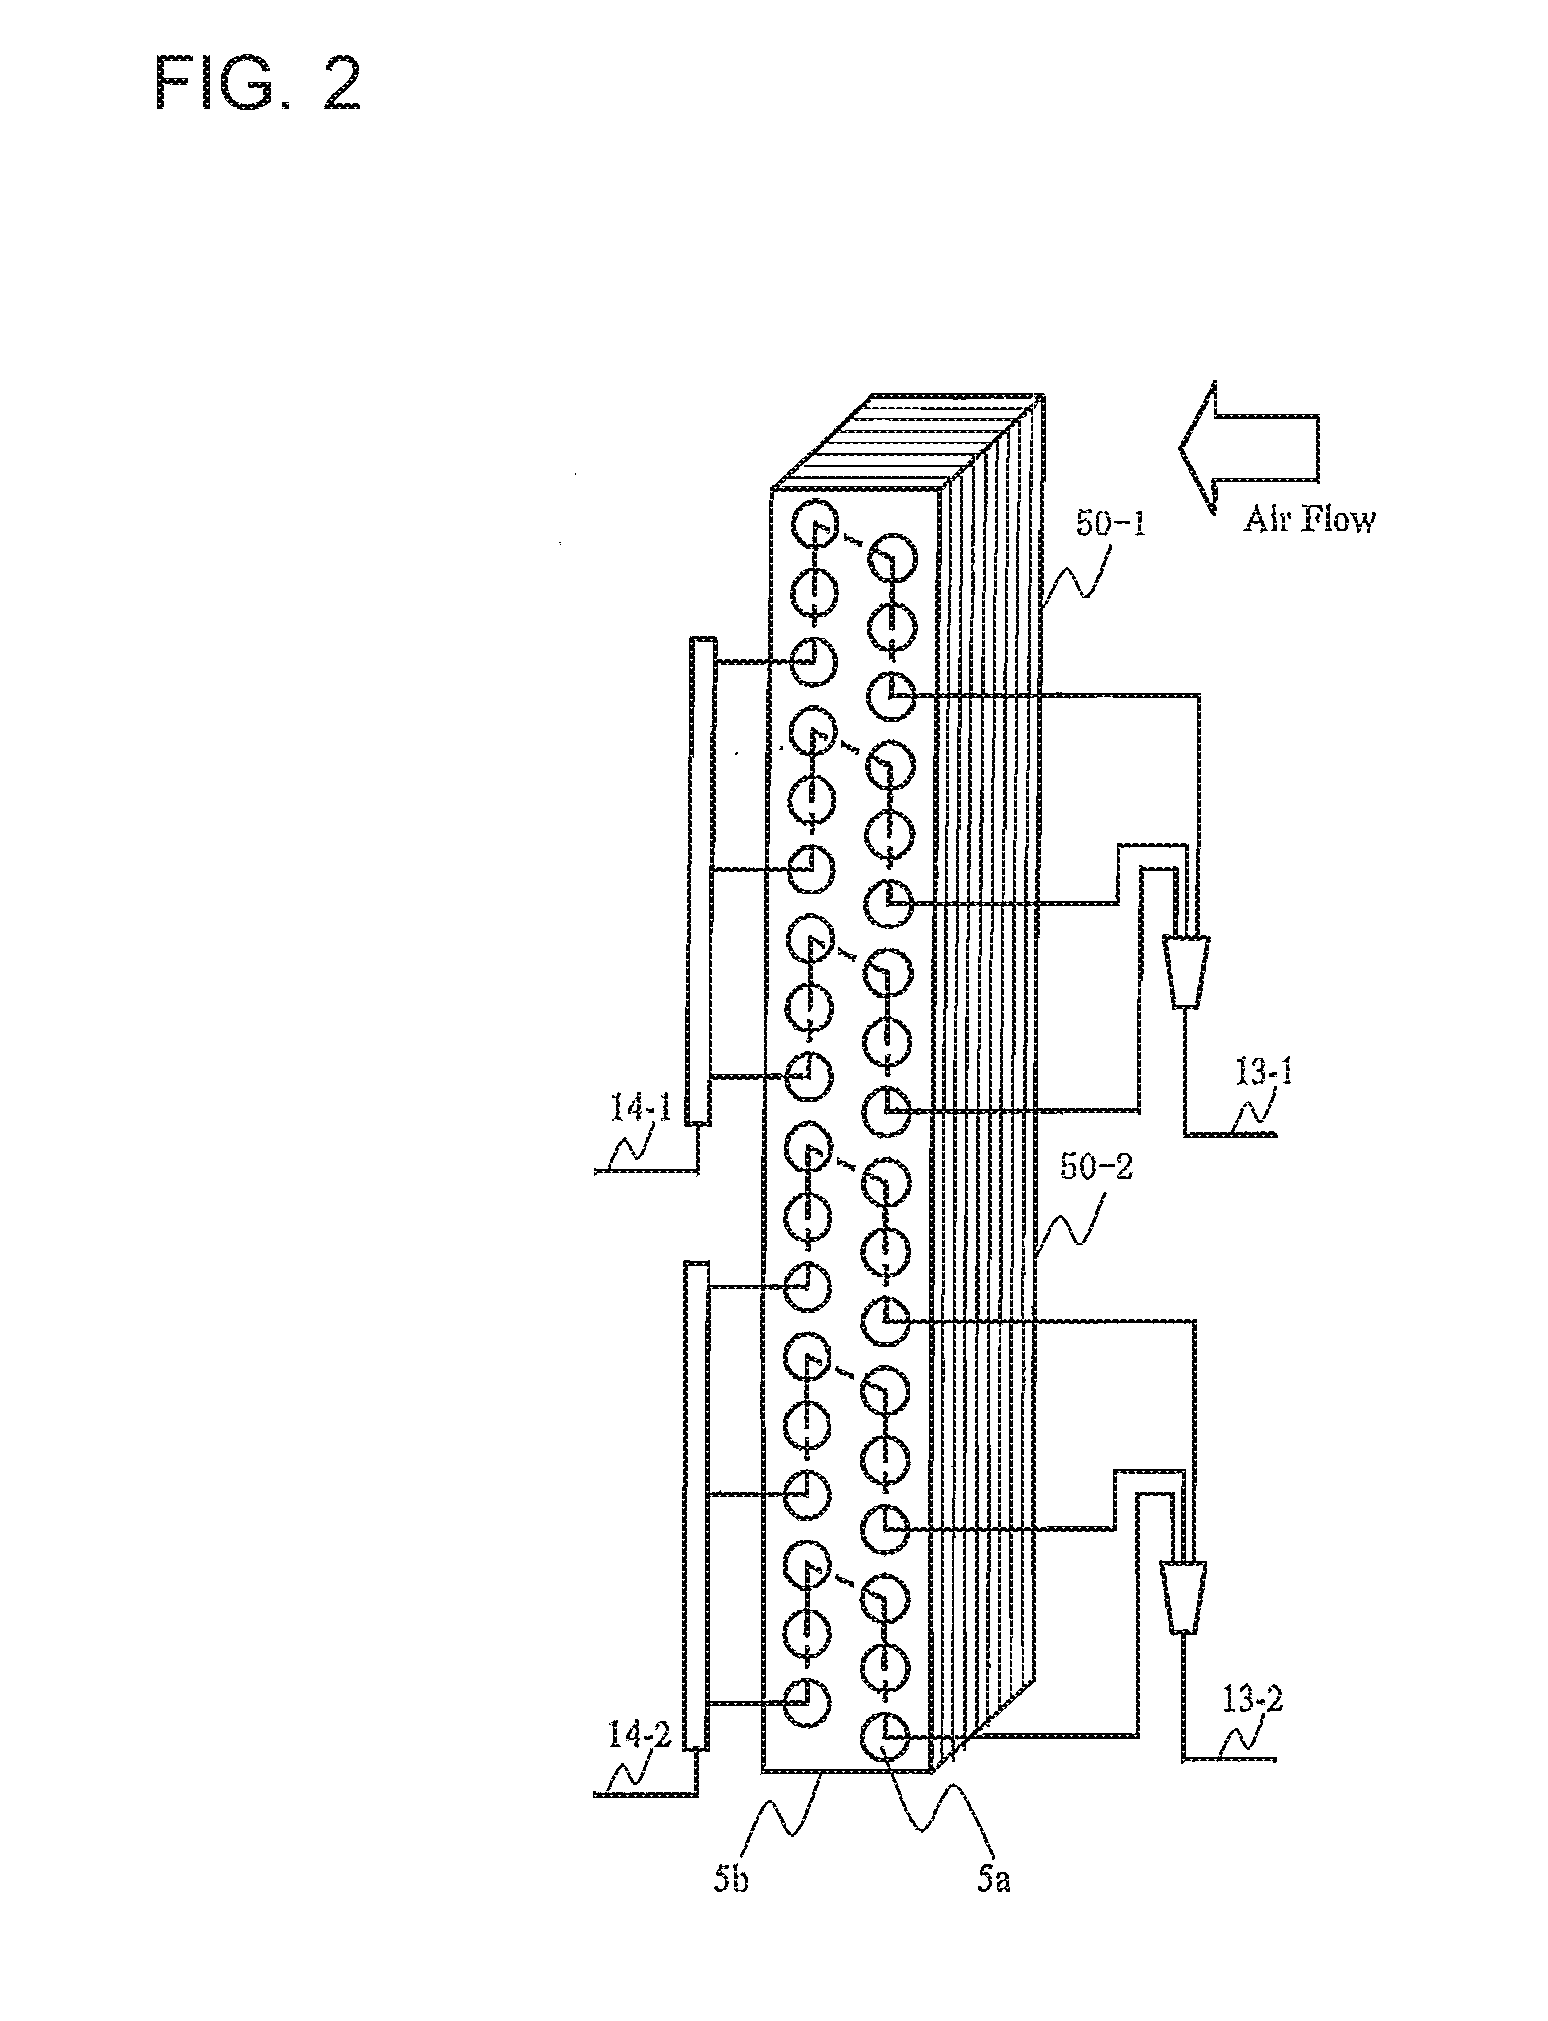 Heat source side unit and refrigeration cycle apparatus